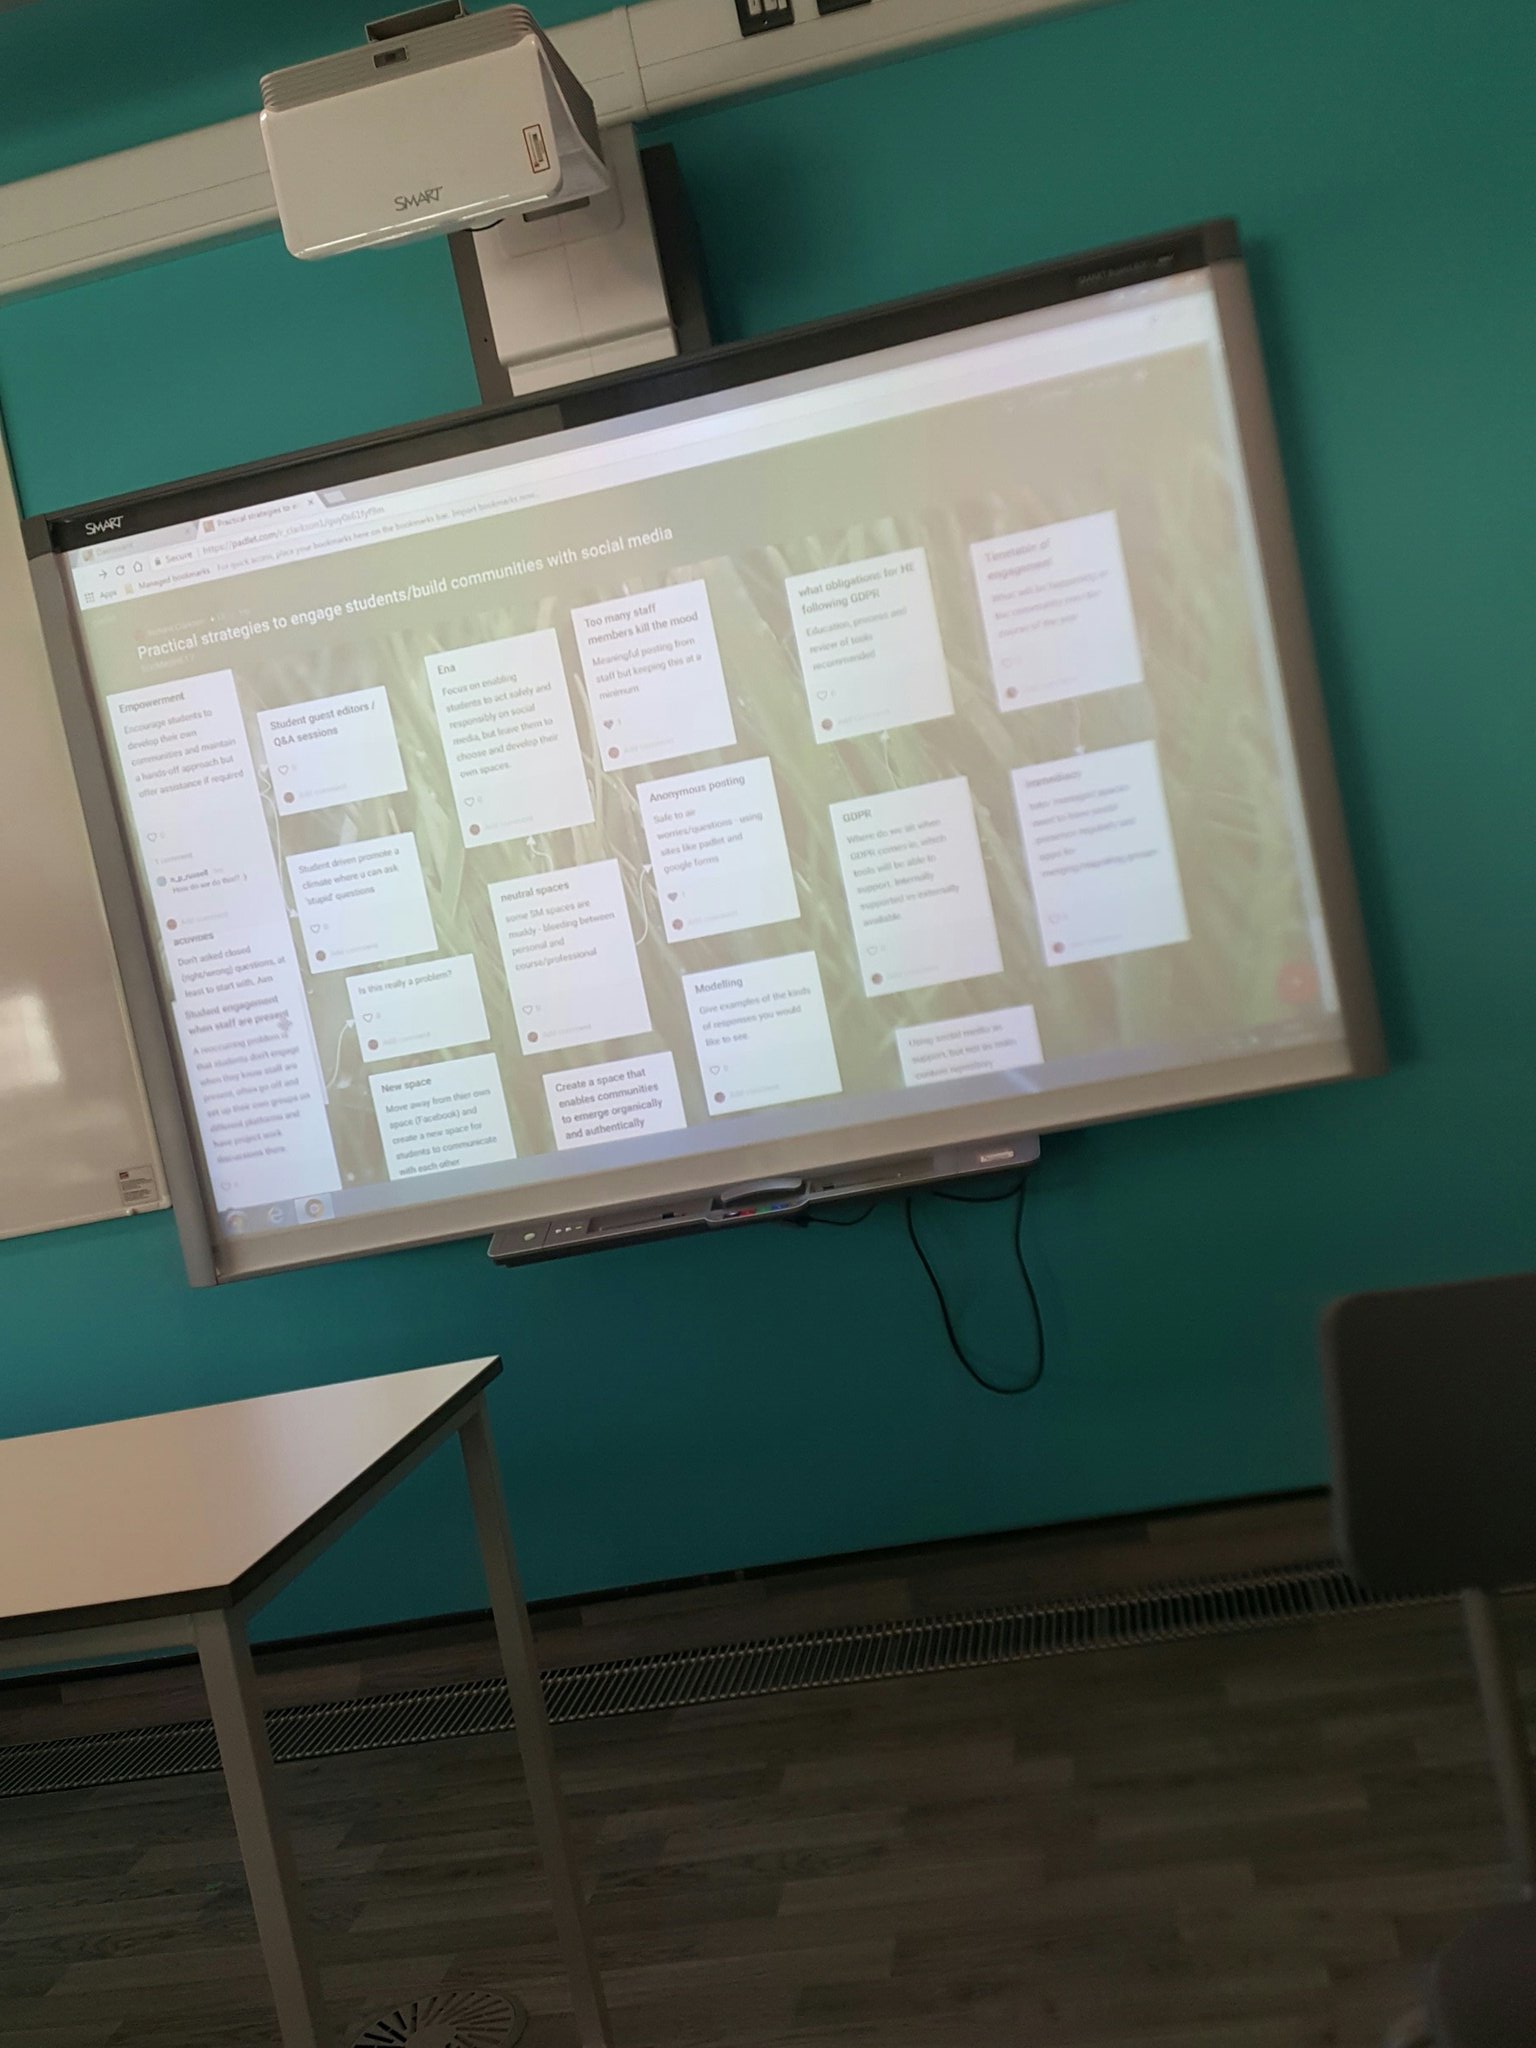 Today I've learnt that Padlet is a great platform to use f9r discussions! #SocMedHE17 https://t.co/HQsfsyXPju